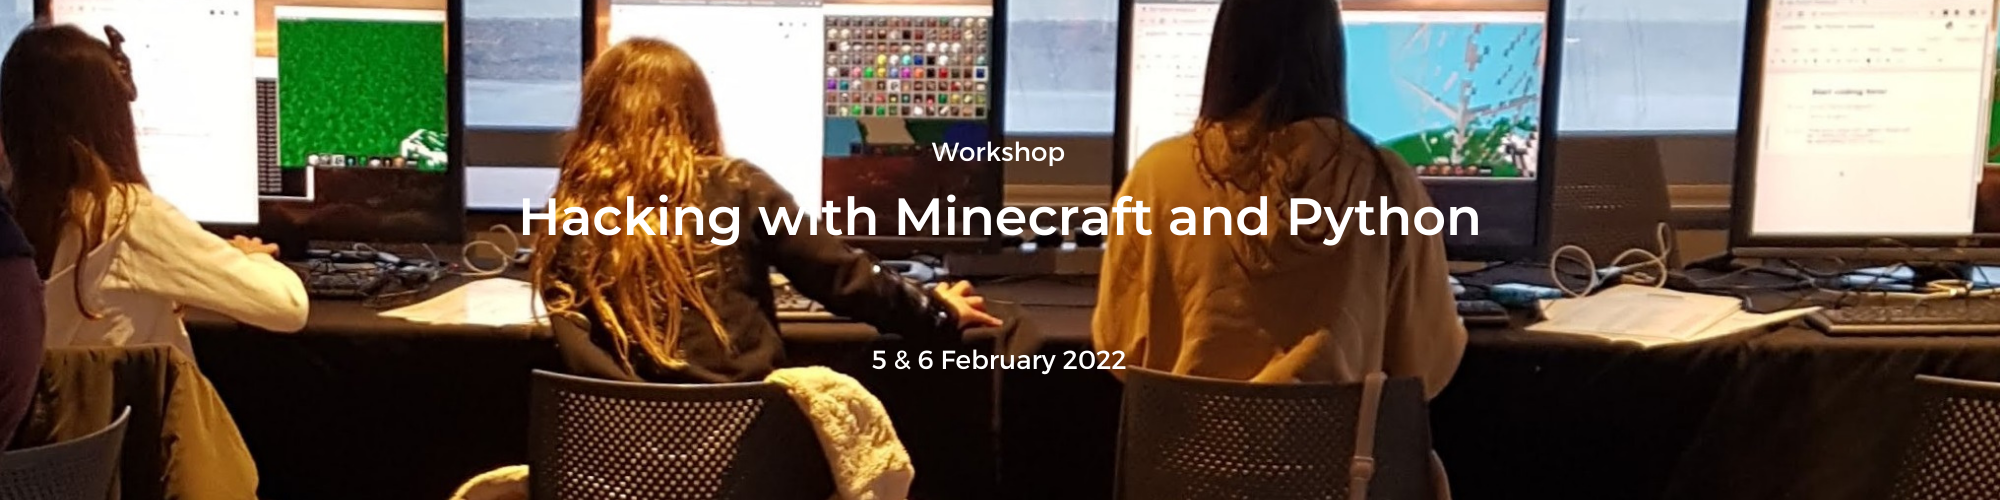 Hacking with Minecraft and Python